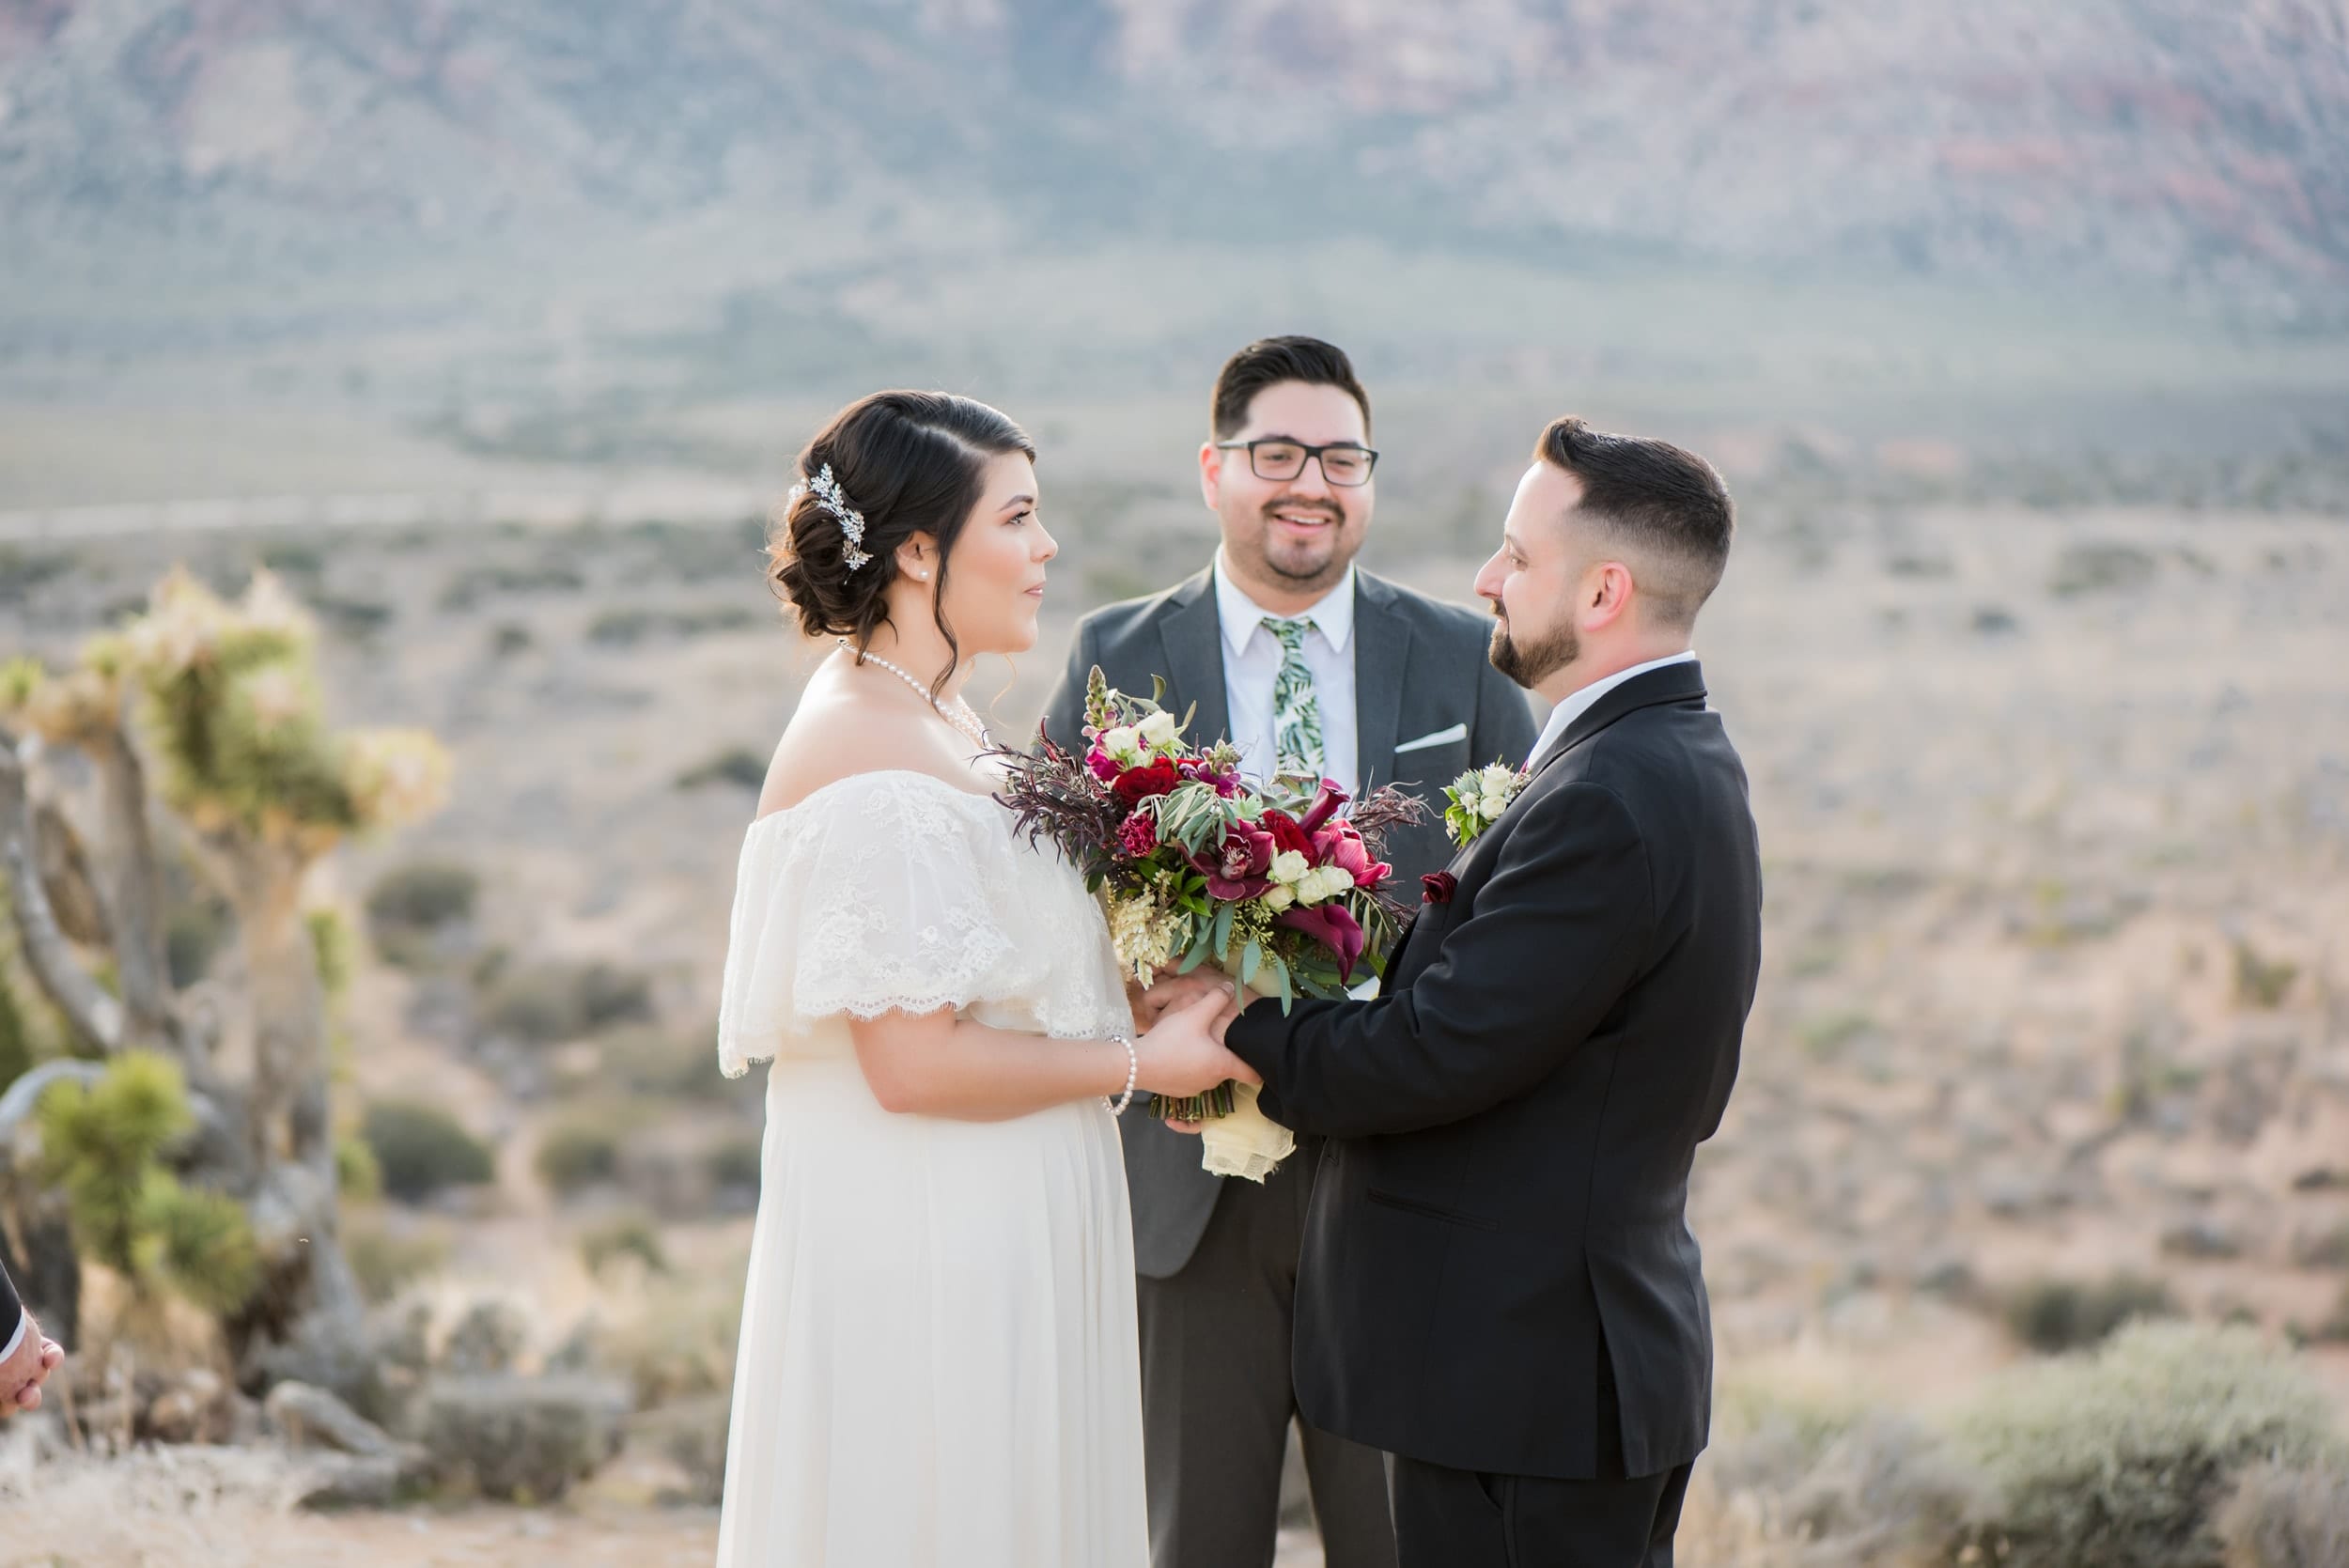 How to Find the Perfect Wedding Officiant